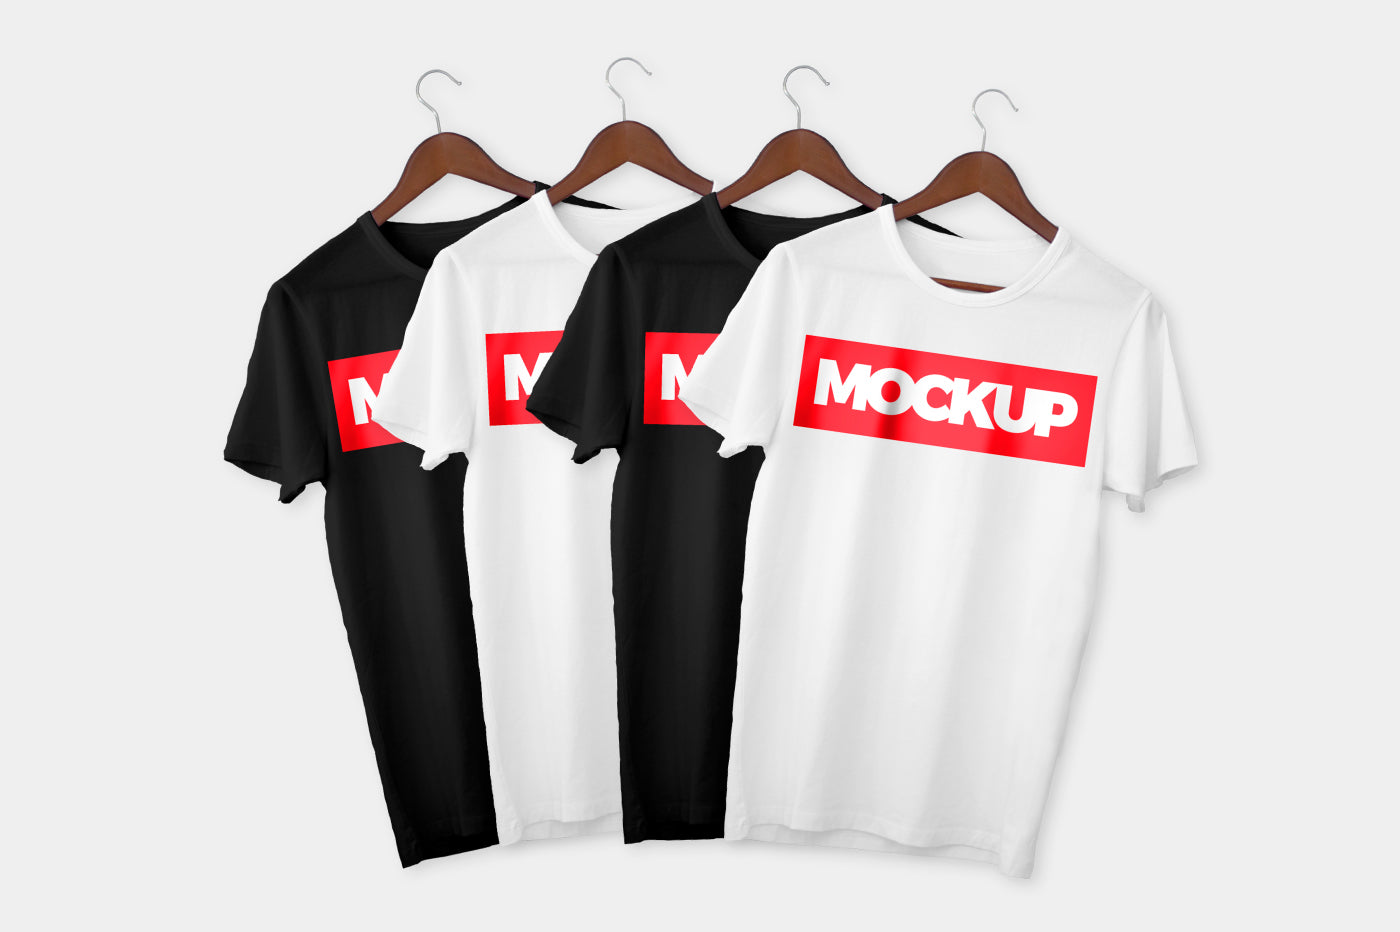 top T-Shirt Mockup with Amazing Design